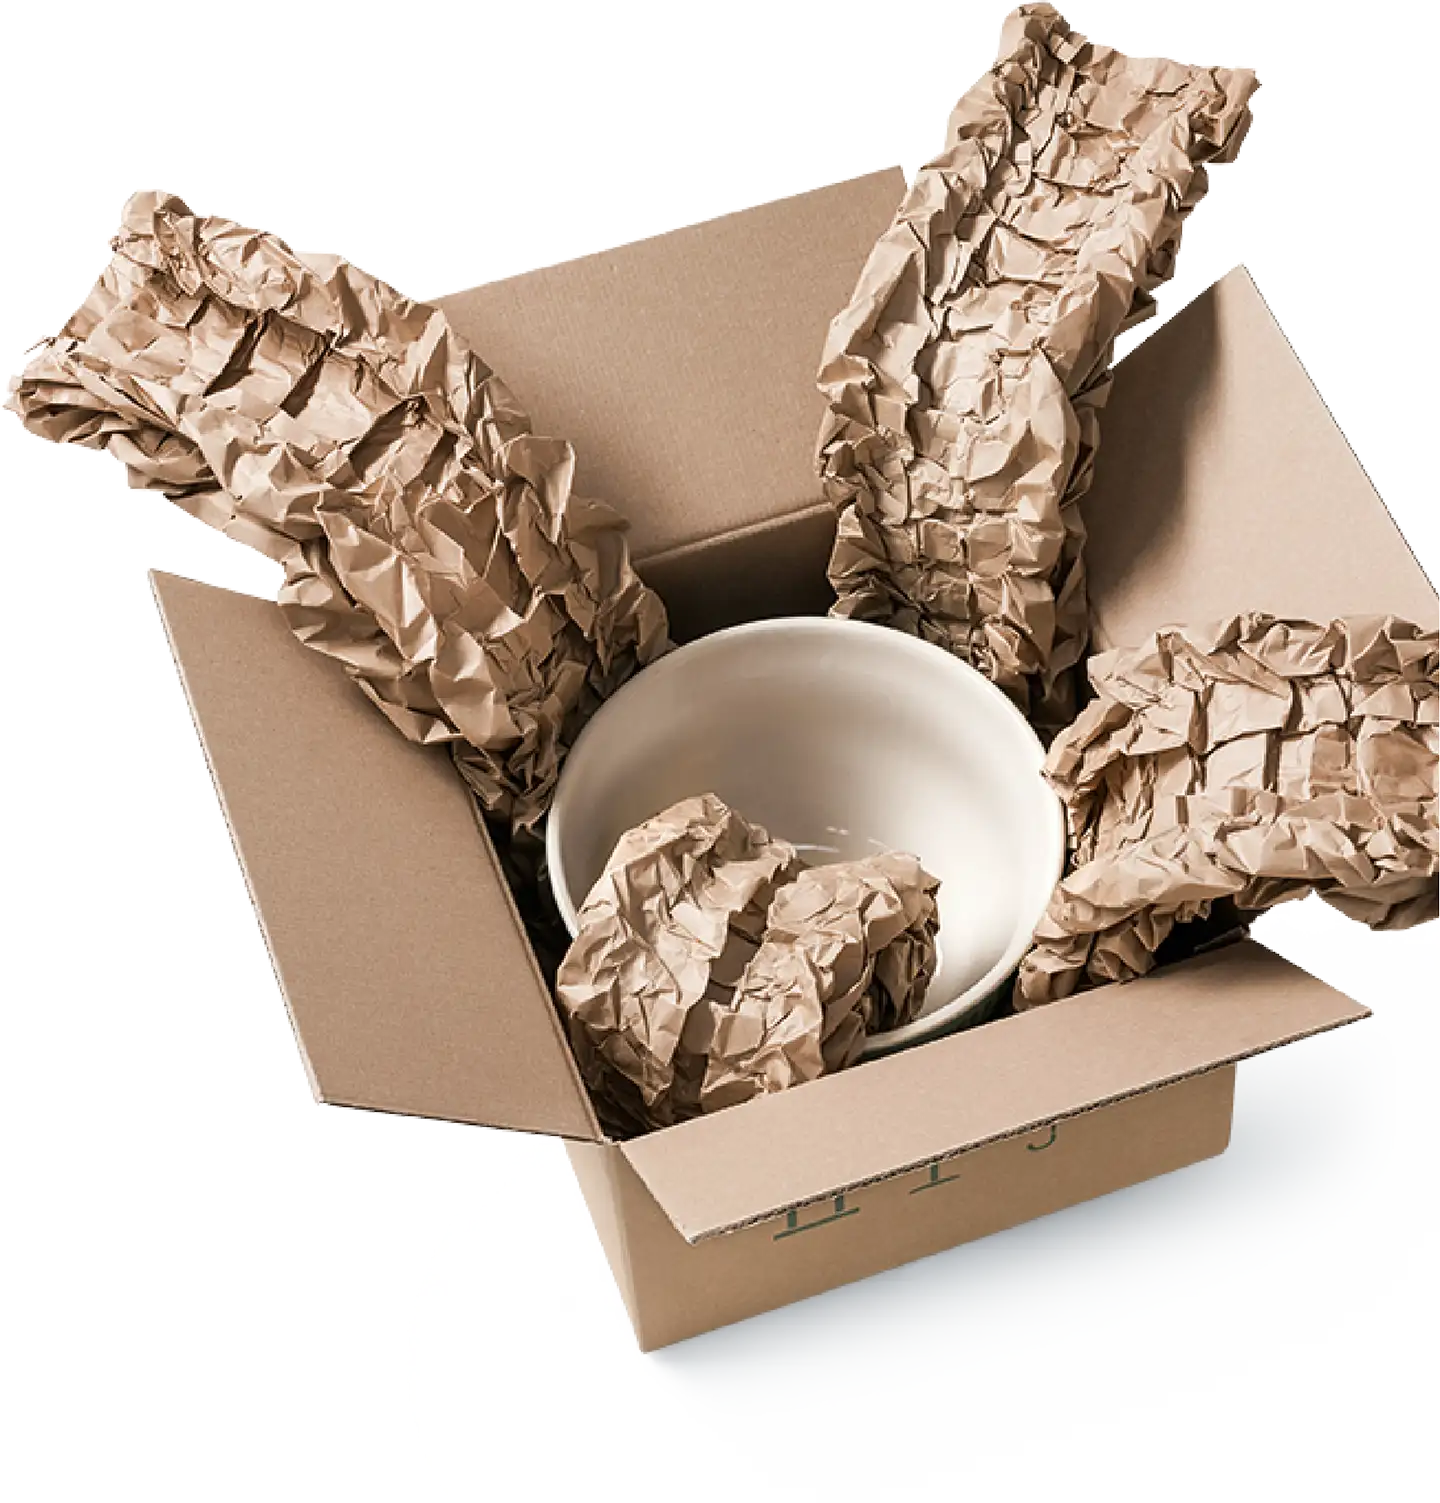 open cardboard box with packaging